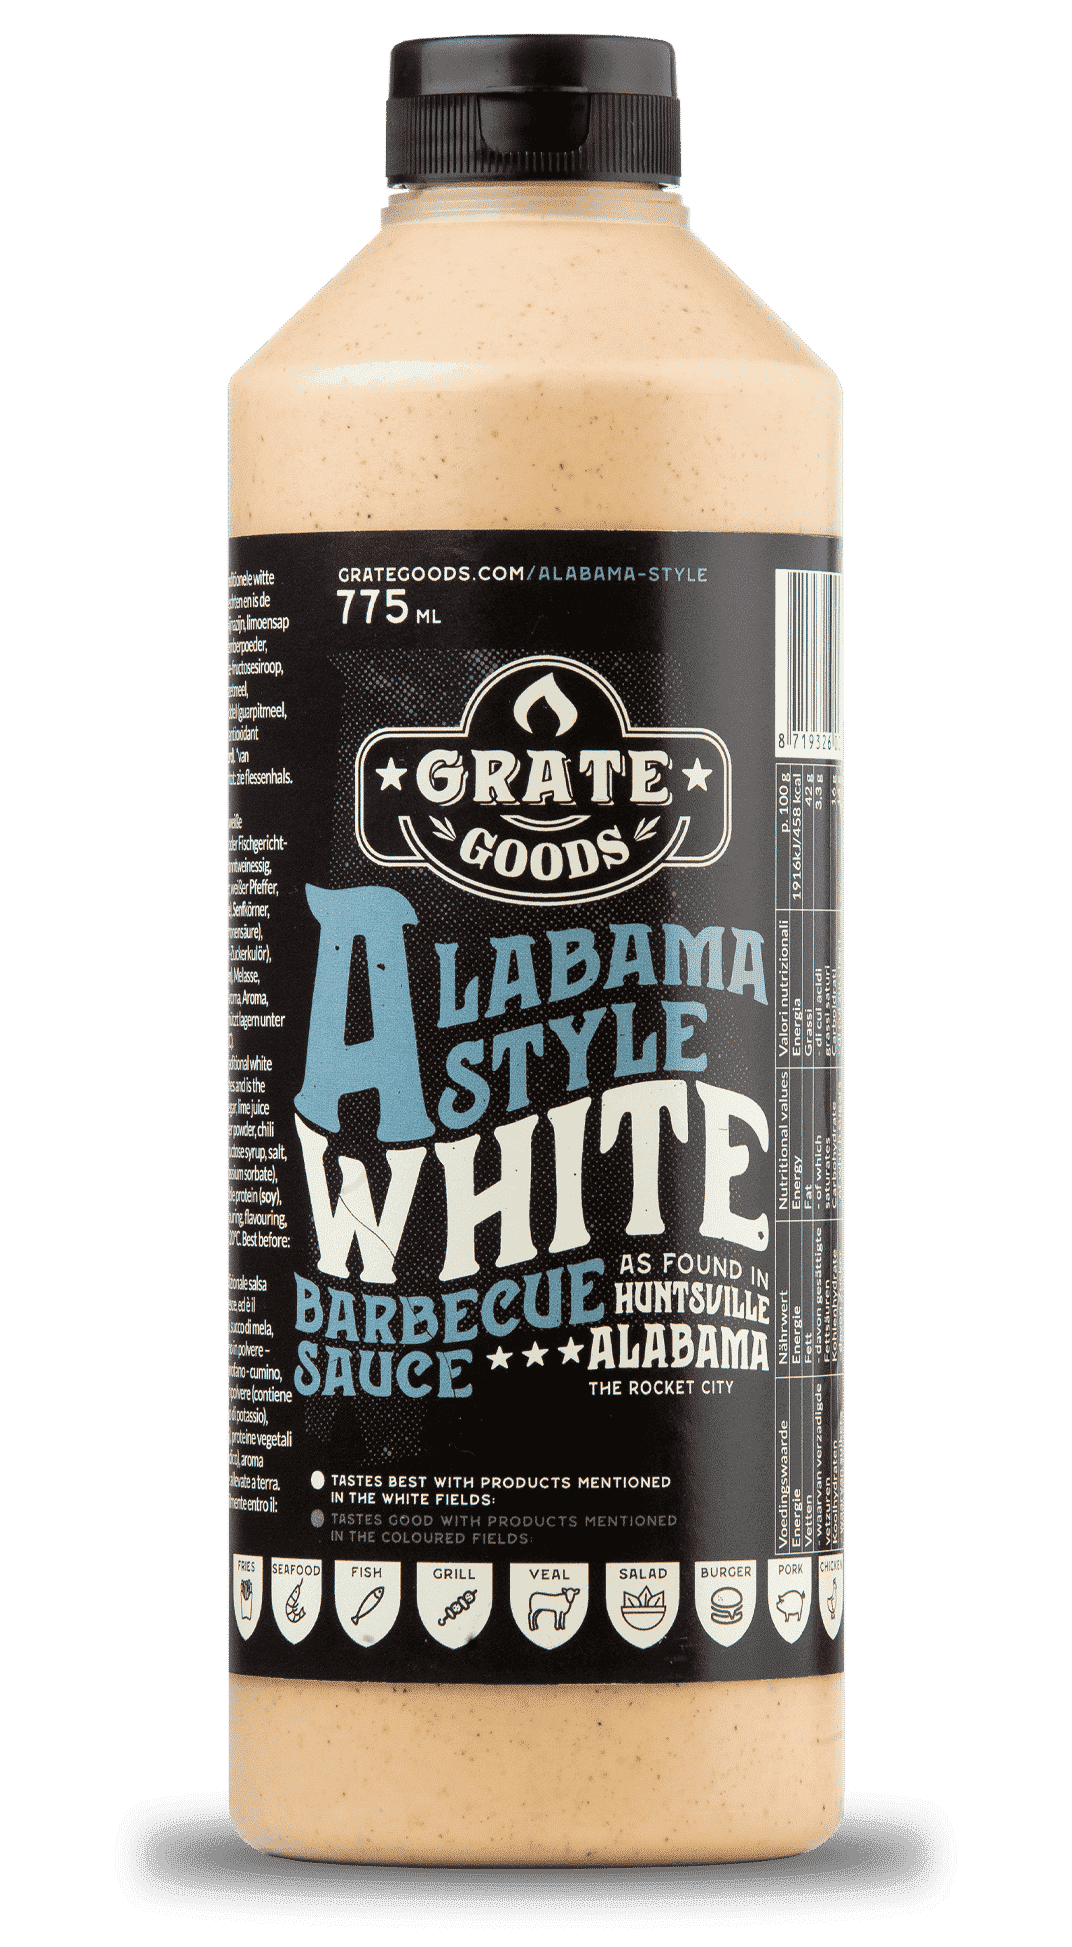 Alabama Style White barbecue sauce - bbq saus - Grate Goods